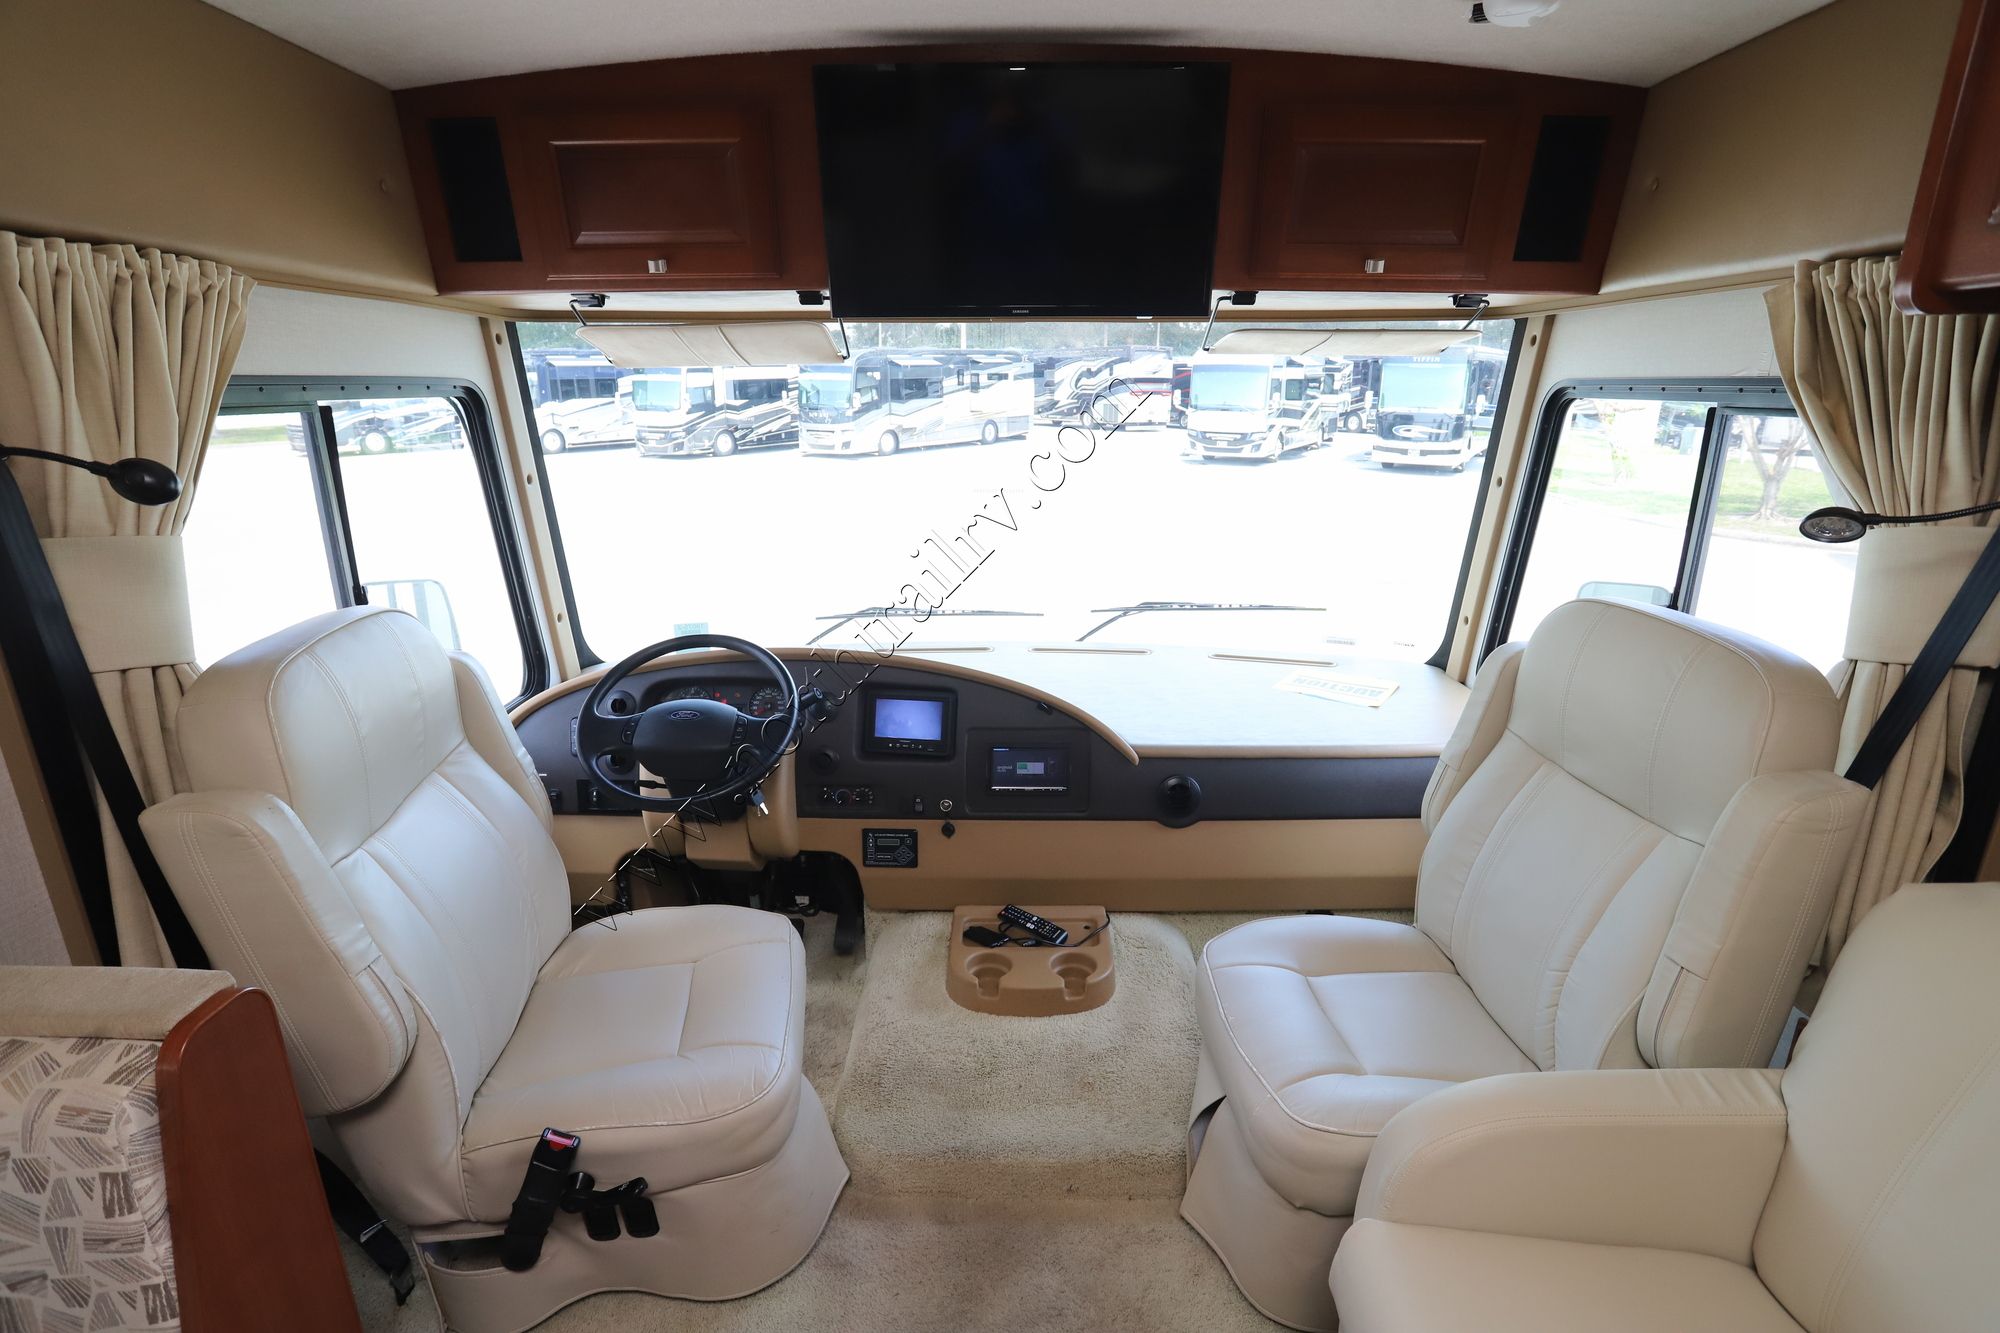 Used 2014 Itasca Sunstar 26HE Class A  For Sale